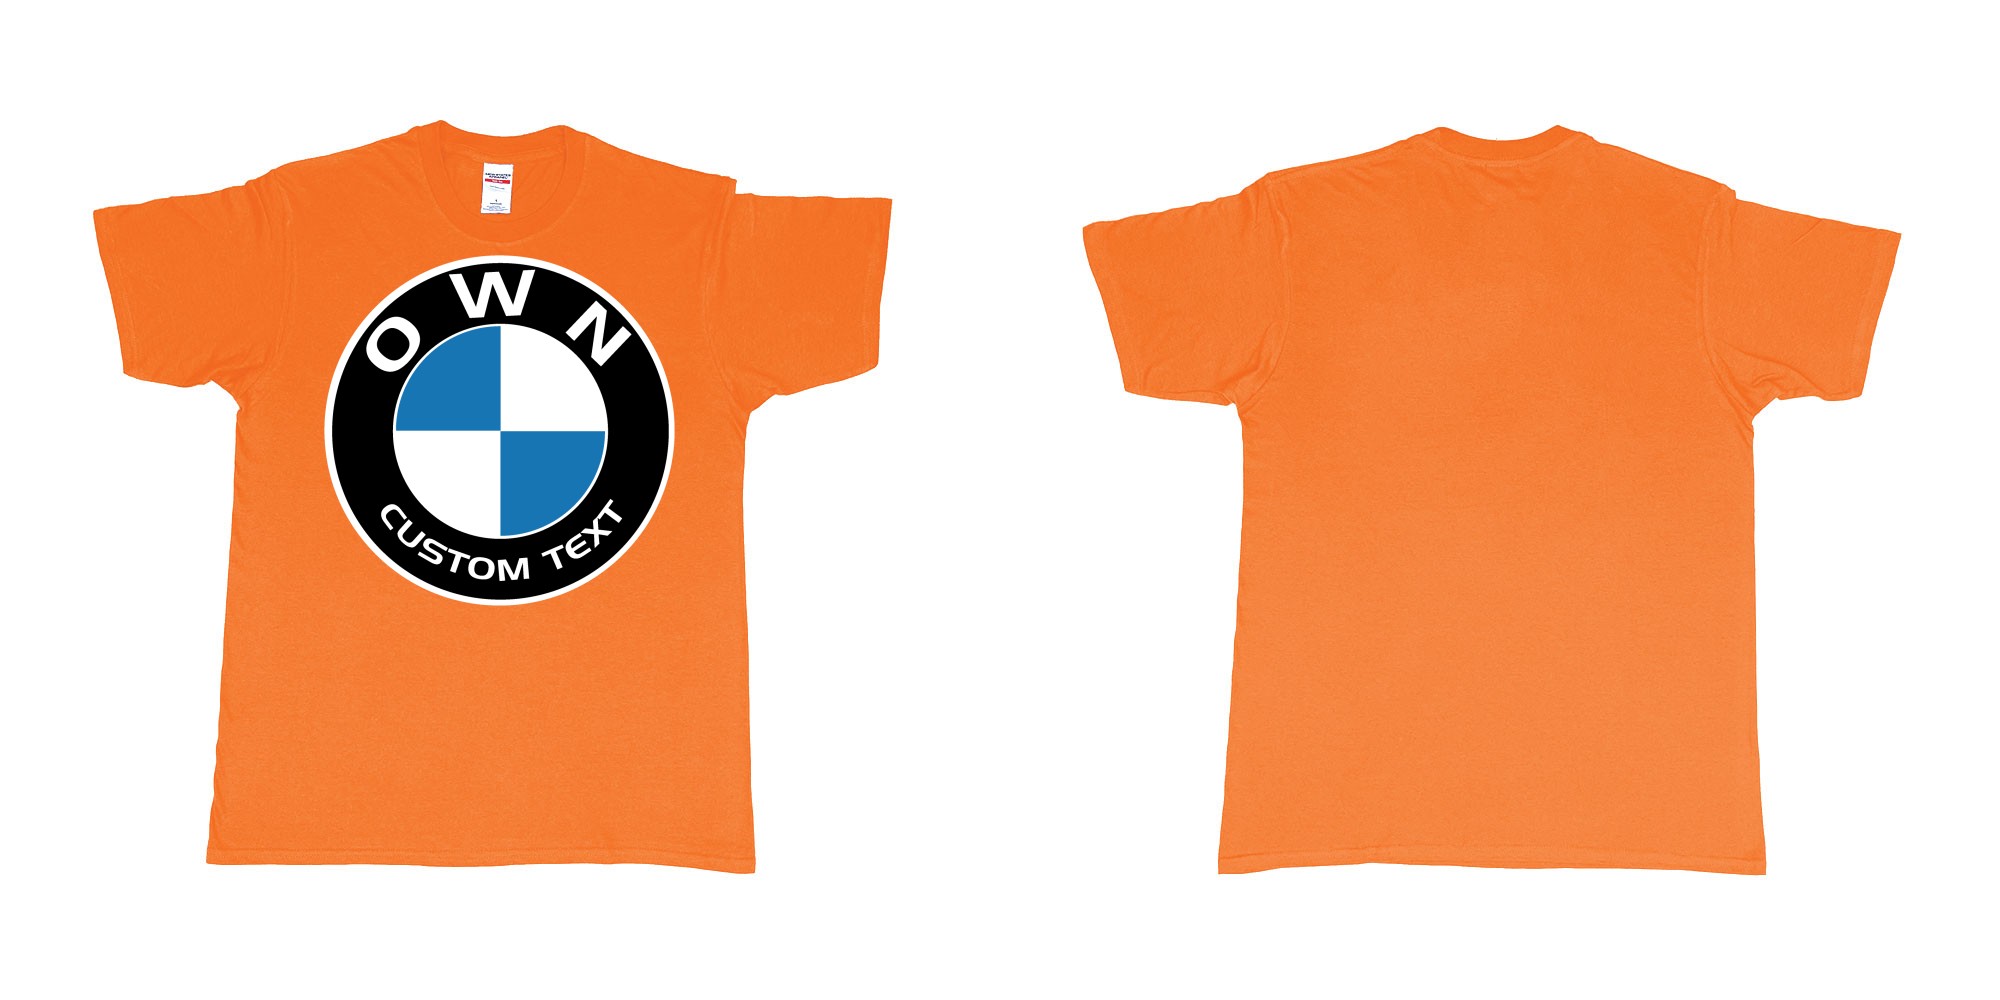 Custom tshirt design BMW logo custom text tshirt printing in fabric color orange choice your own text made in Bali by The Pirate Way